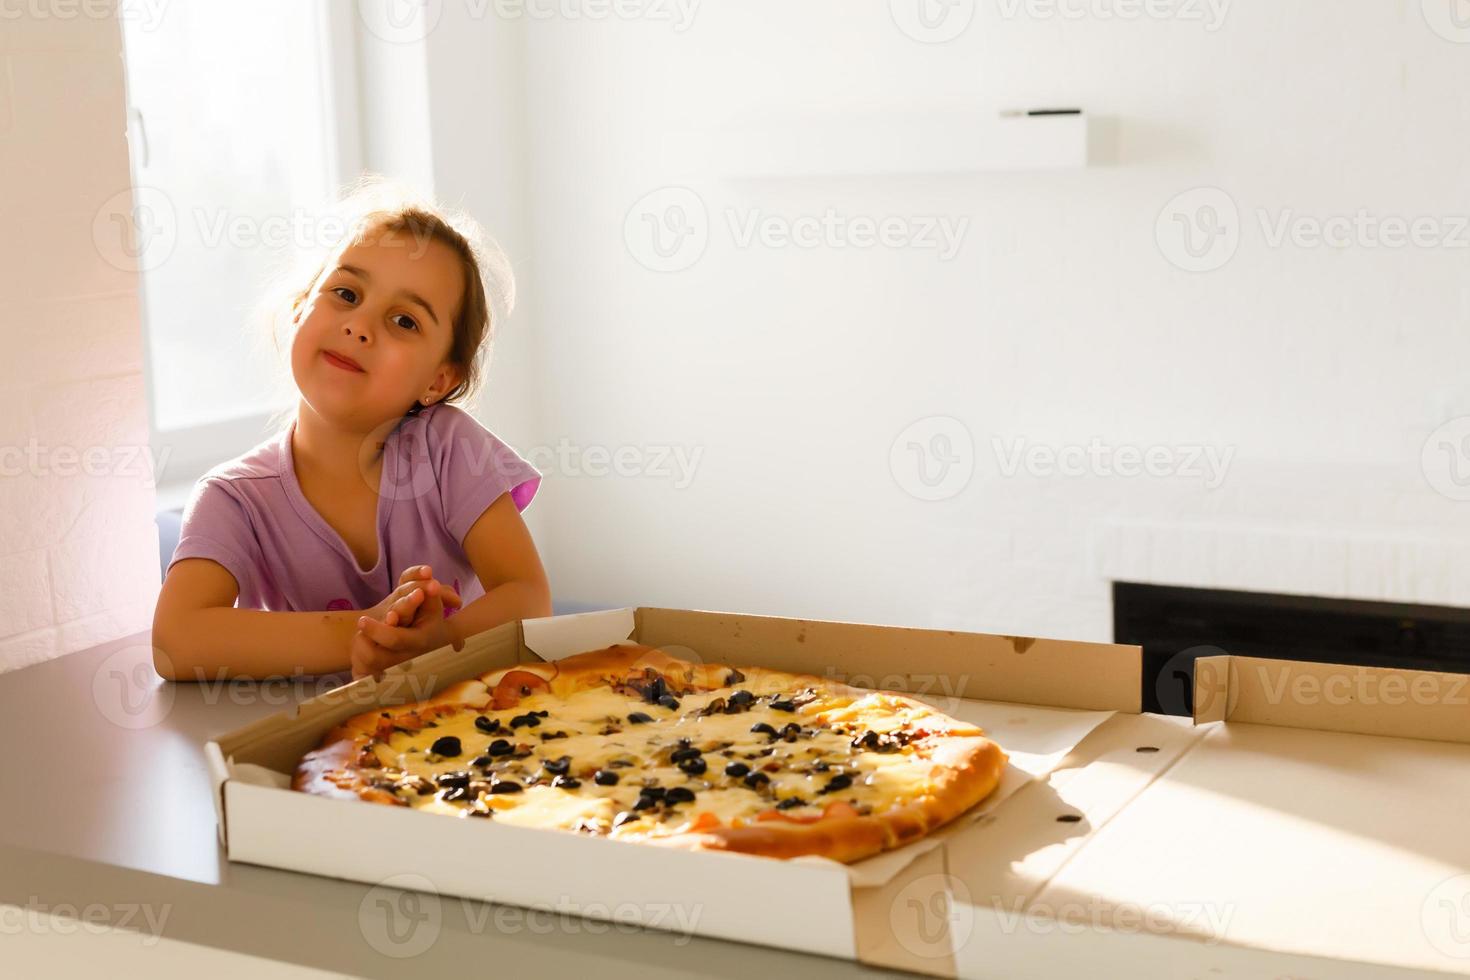 Charming happy young girl laugh and biting off big slice of fresh made pizza. She sit at white chair in Provence style interior, smile and enjoy sunny day and yummy meal. She has long blonde hair. photo